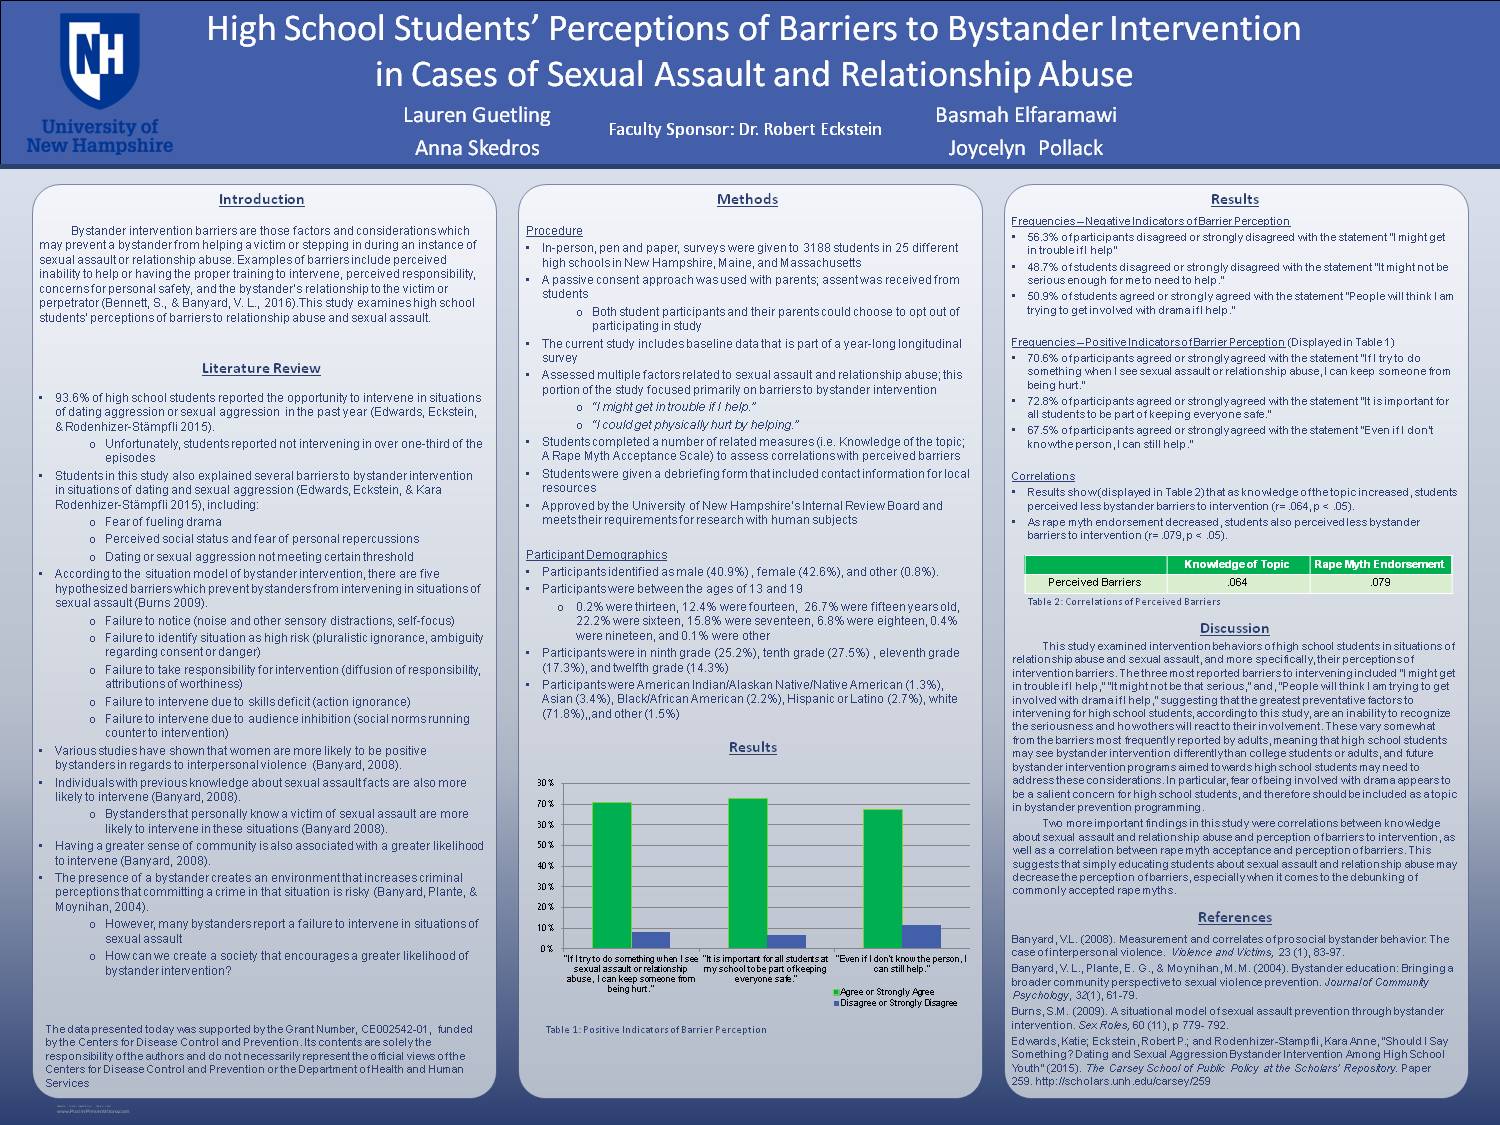 High School Students' Perceptions Of Barriers To Bystander Intervention In Cases Of Sexual Assault And Relationship Abuse by lg2003